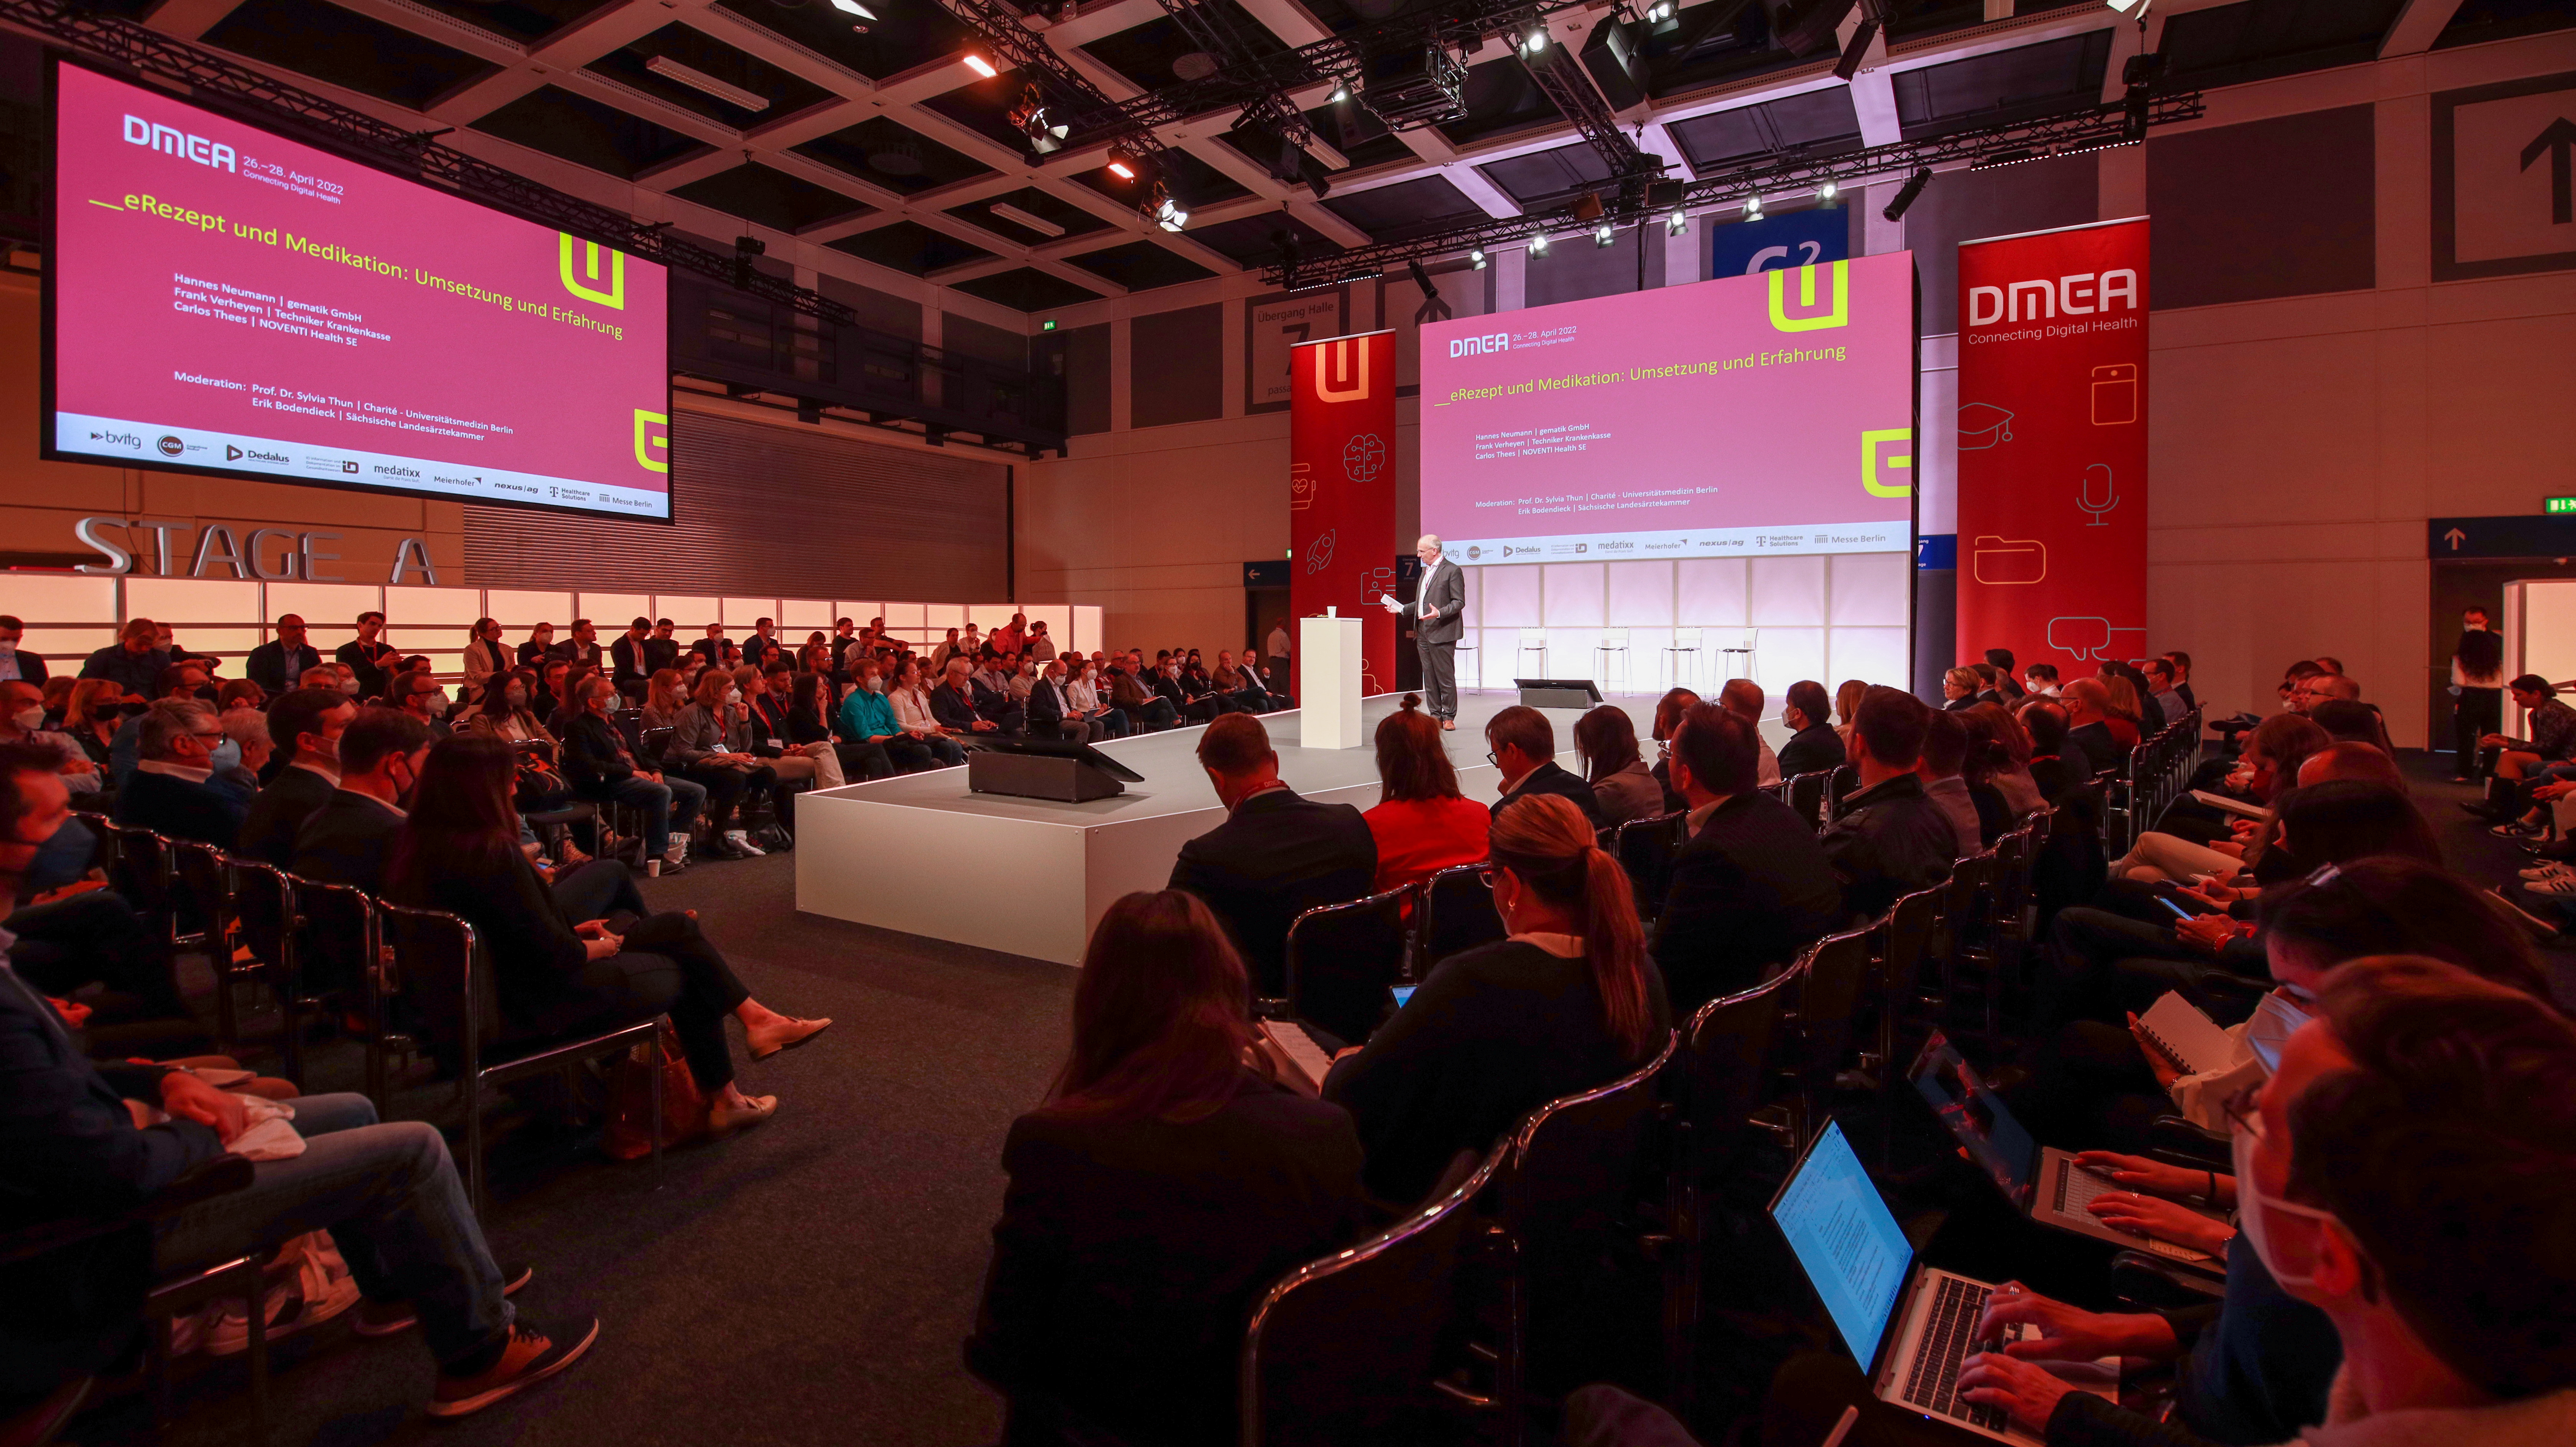 Over 200 speakers will take to the stage at DMEA 2023 and present their visions and solutions for the digital transformation of the healthcare system. Image: Messe Berlin 